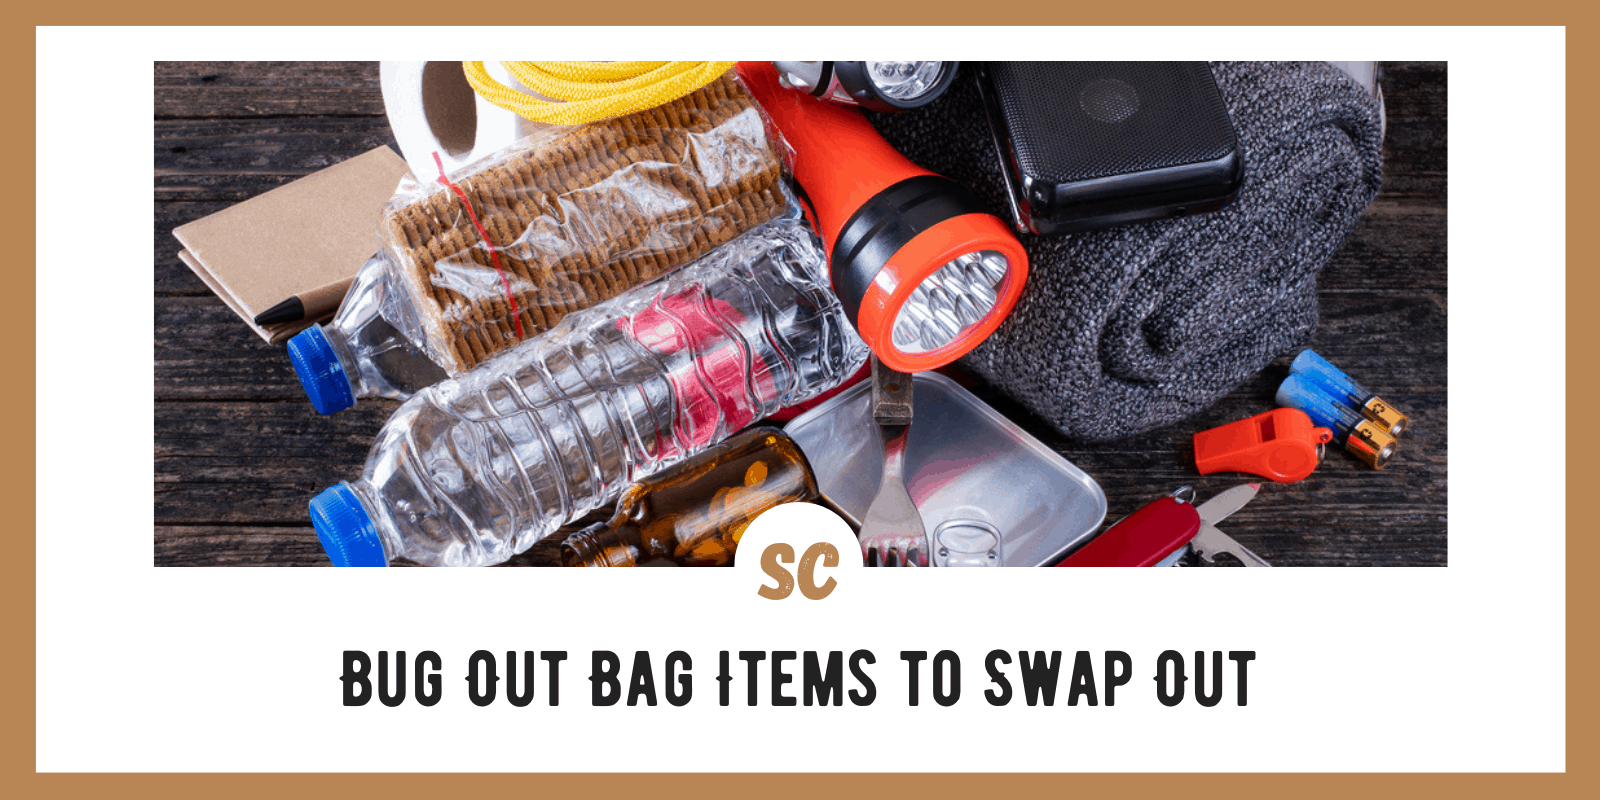 5 Items to Swap Out of Bug Out Bag